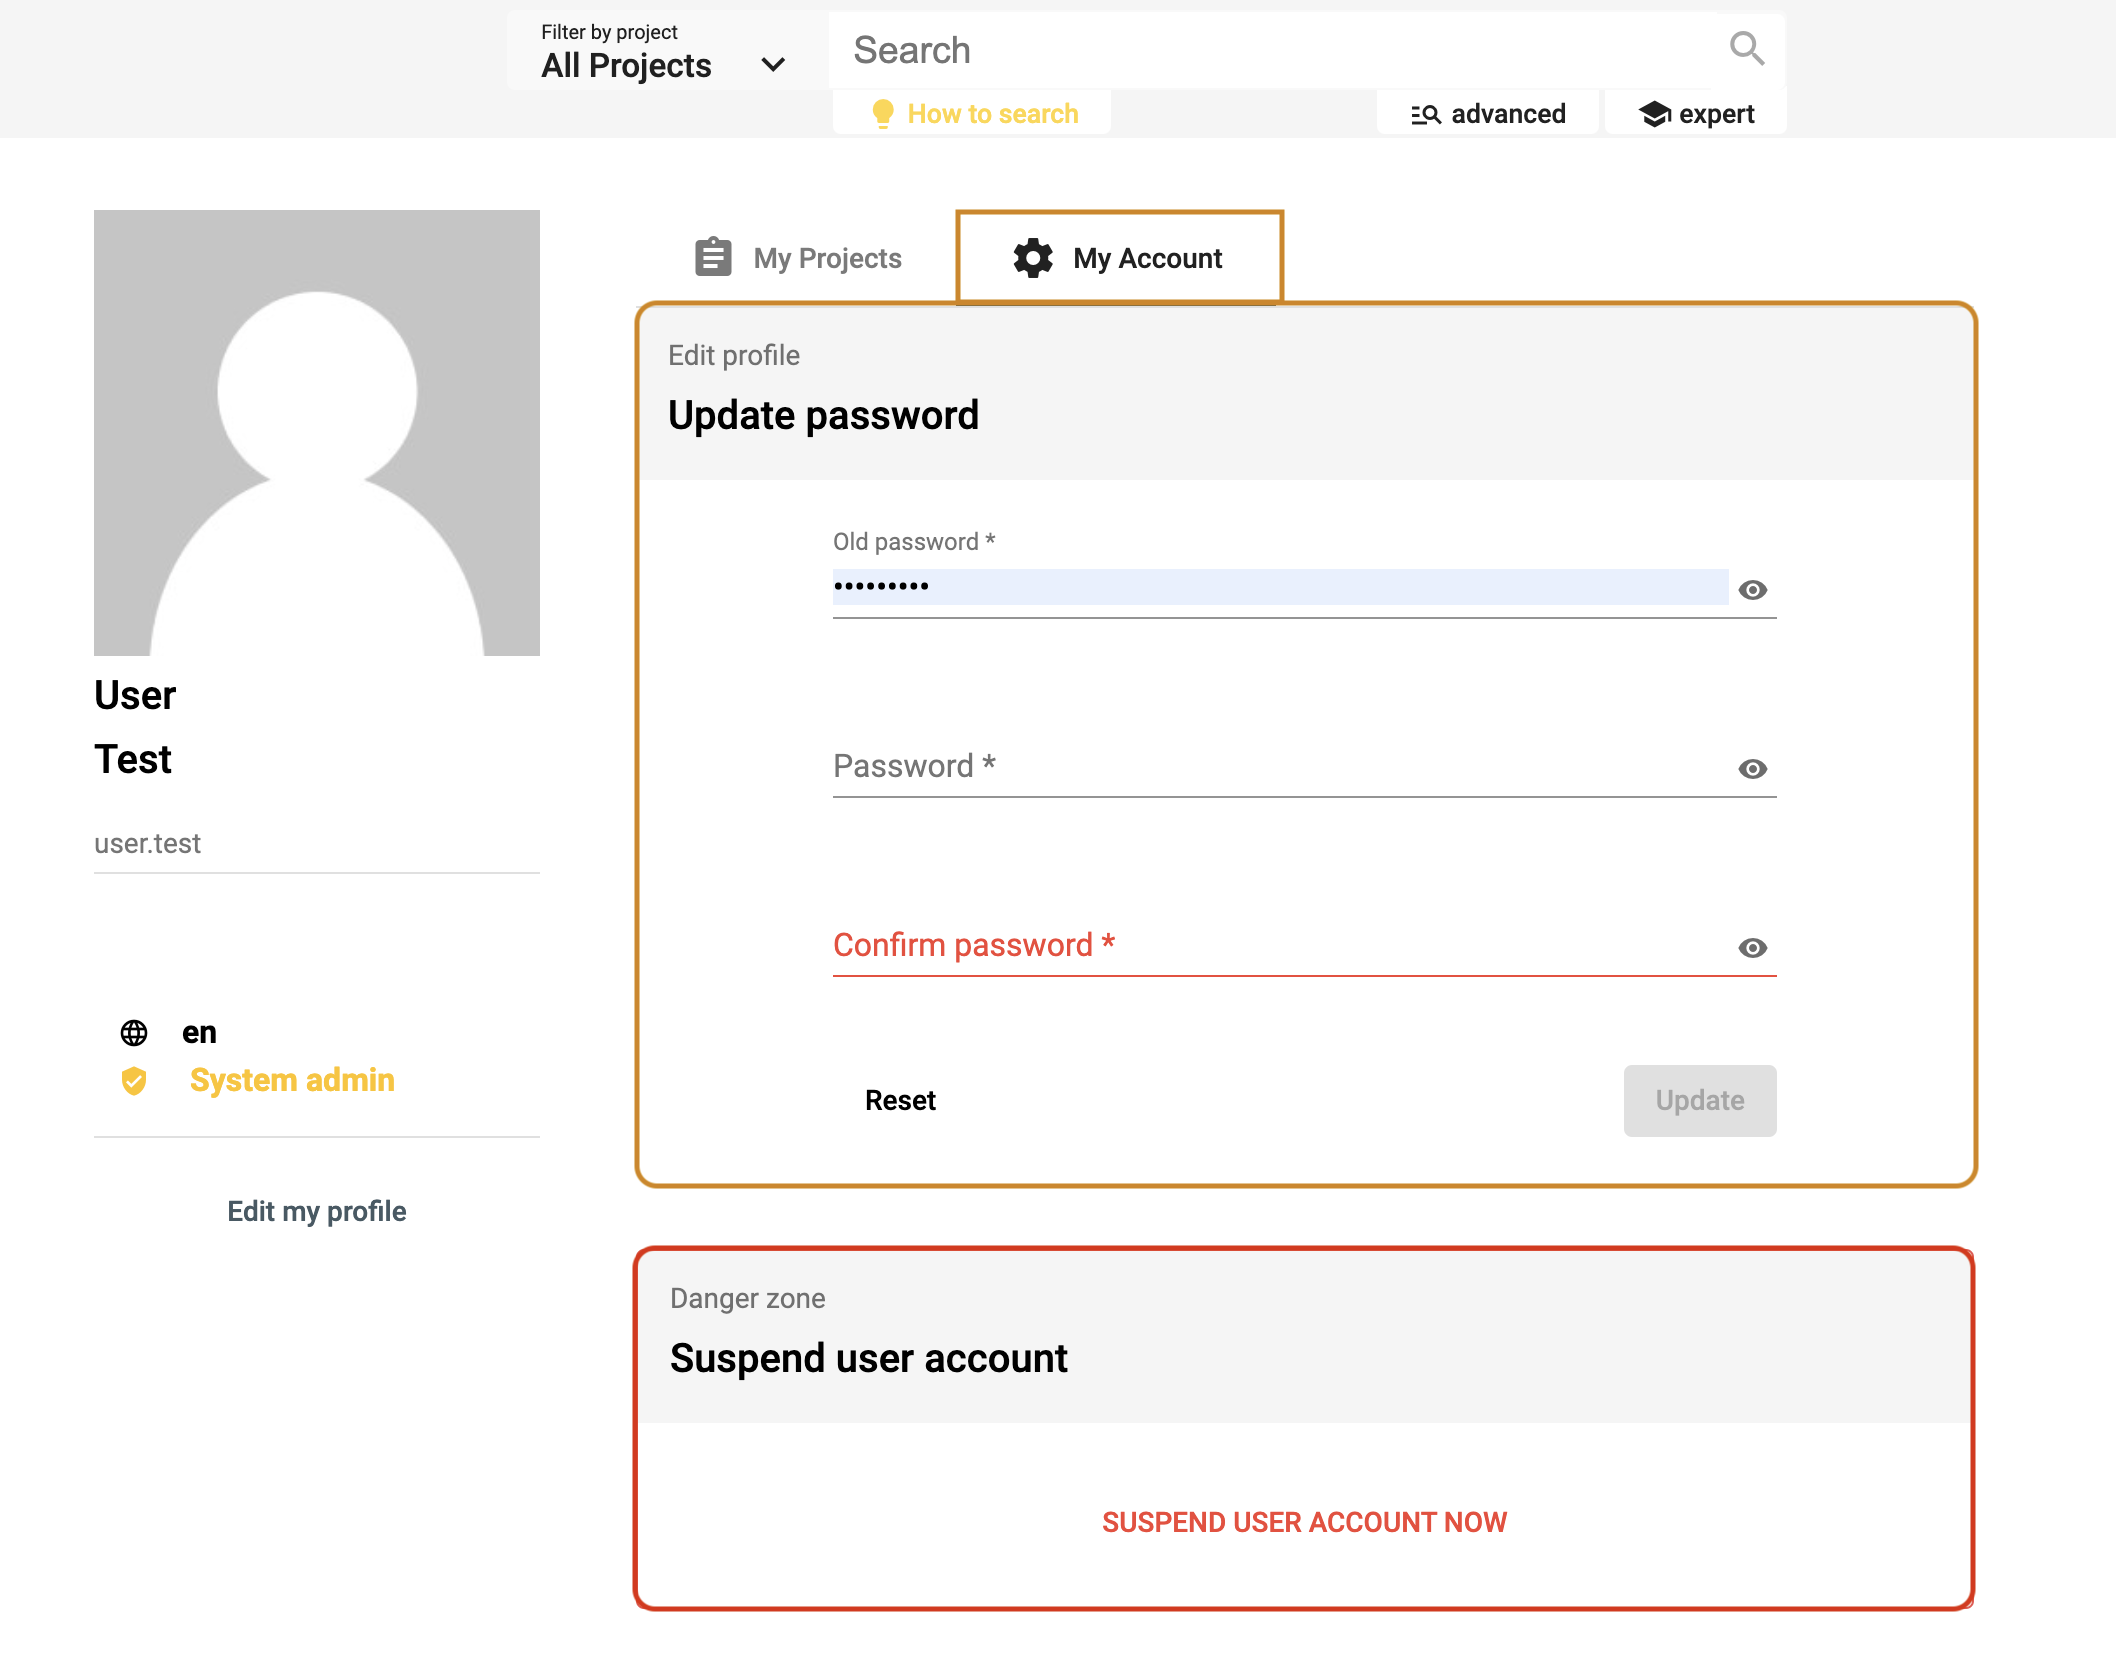 Get access to the user account where the user can reset its password and deactivate its own account